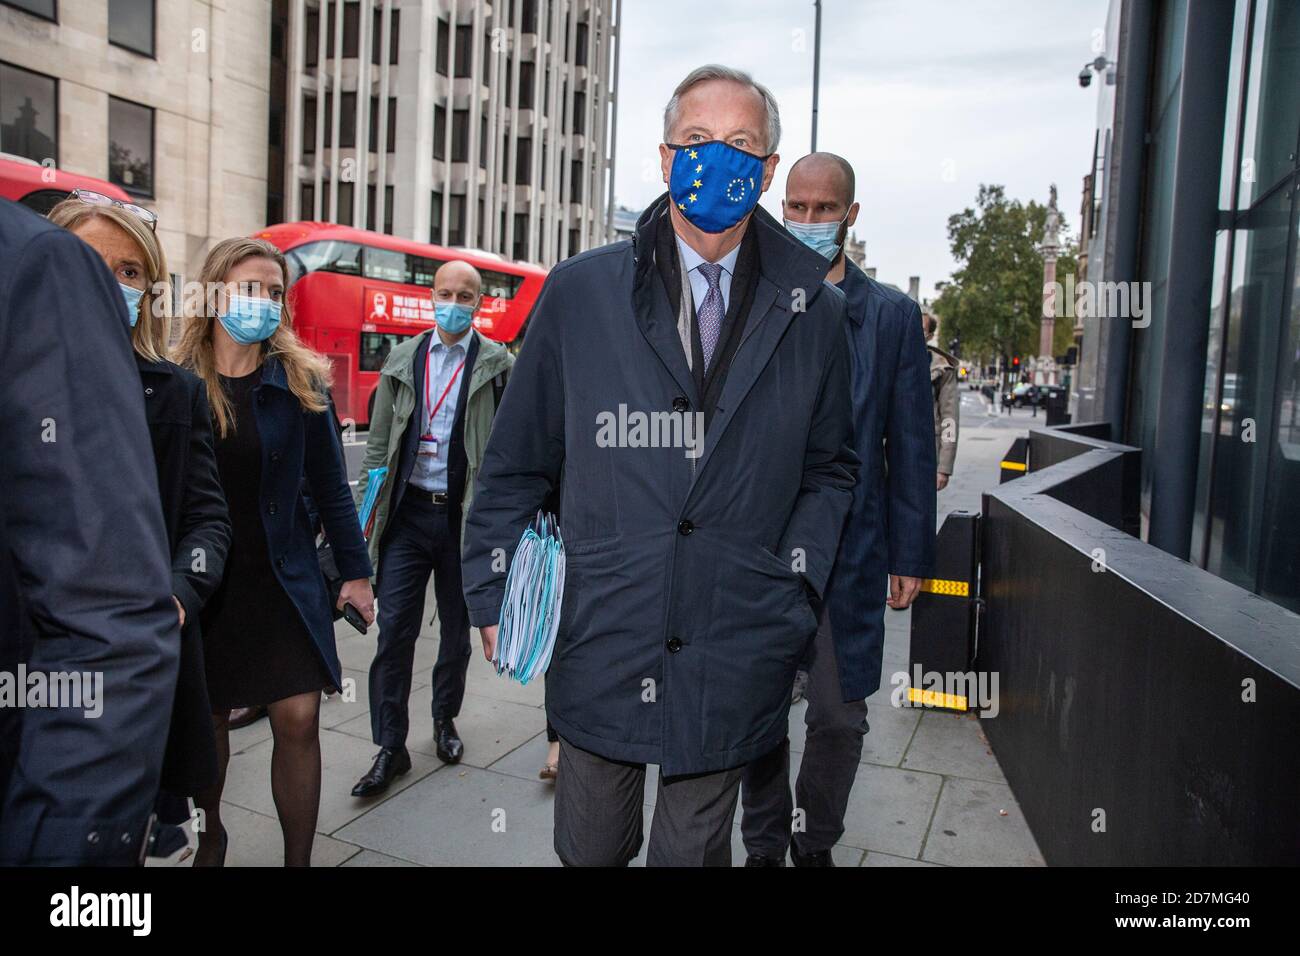 London, UK. 24th Oct, 2020. Michel Barnier arrives in Westminster for Brexit talks, London, UK 24th October 2020 Brexit Trade talks continue in London as the EU's Michel Barnier arrives at the IVS Conference Centre, No.1 Victoria Street today. Credit: Clickpics/Alamy Live News Stock Photo